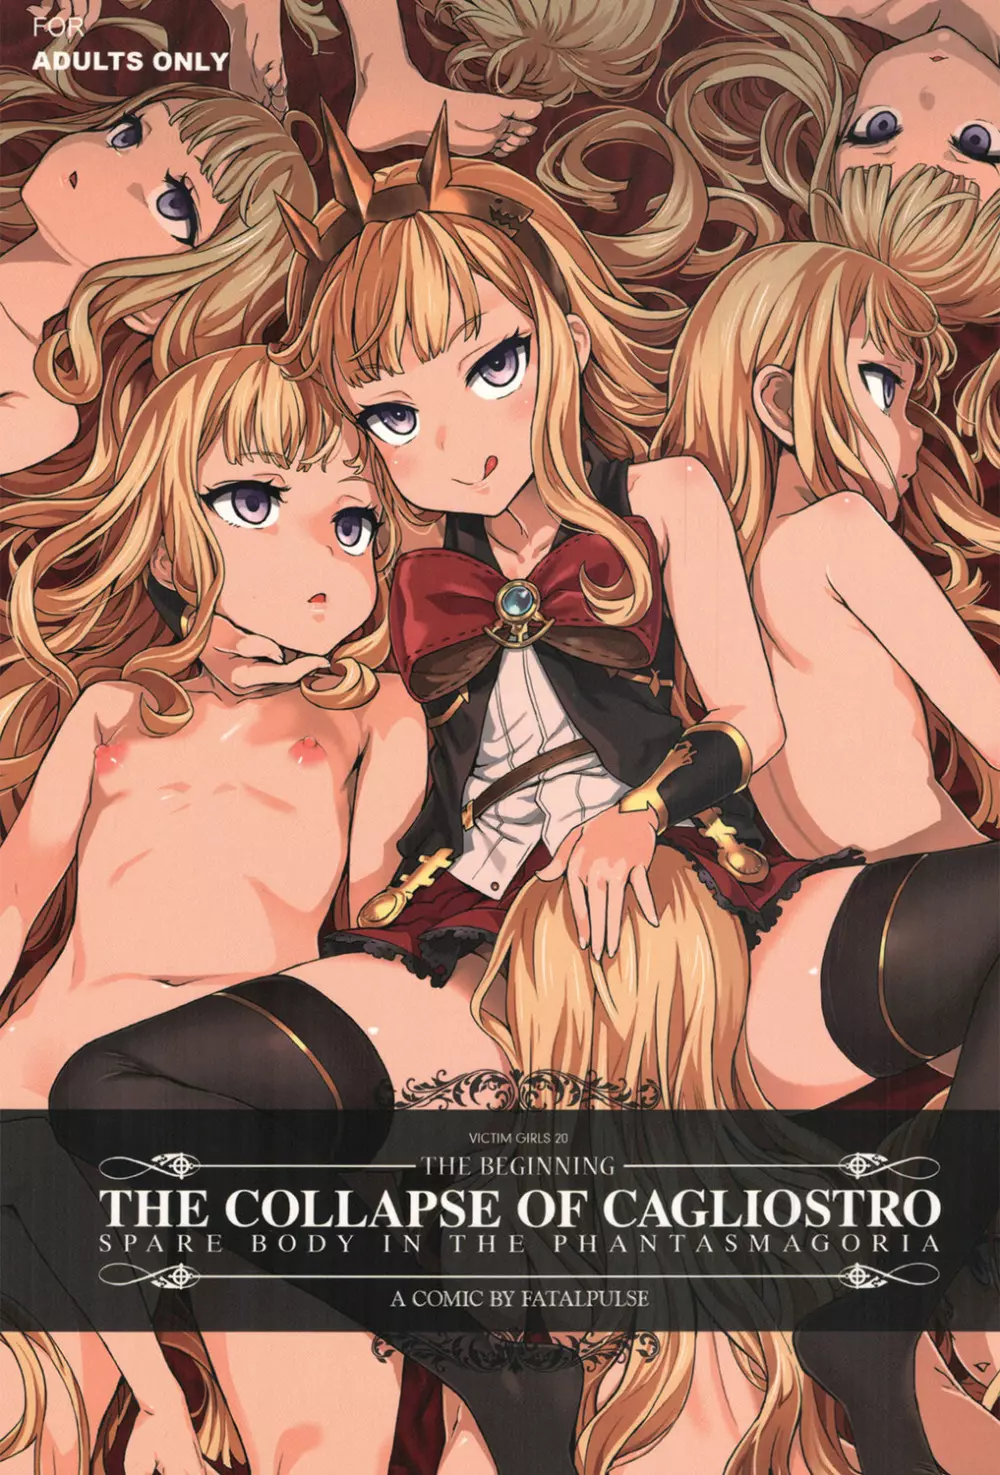 VictimGirls20 THE COLLAPSE OF CAGLIOSTRO Page.1